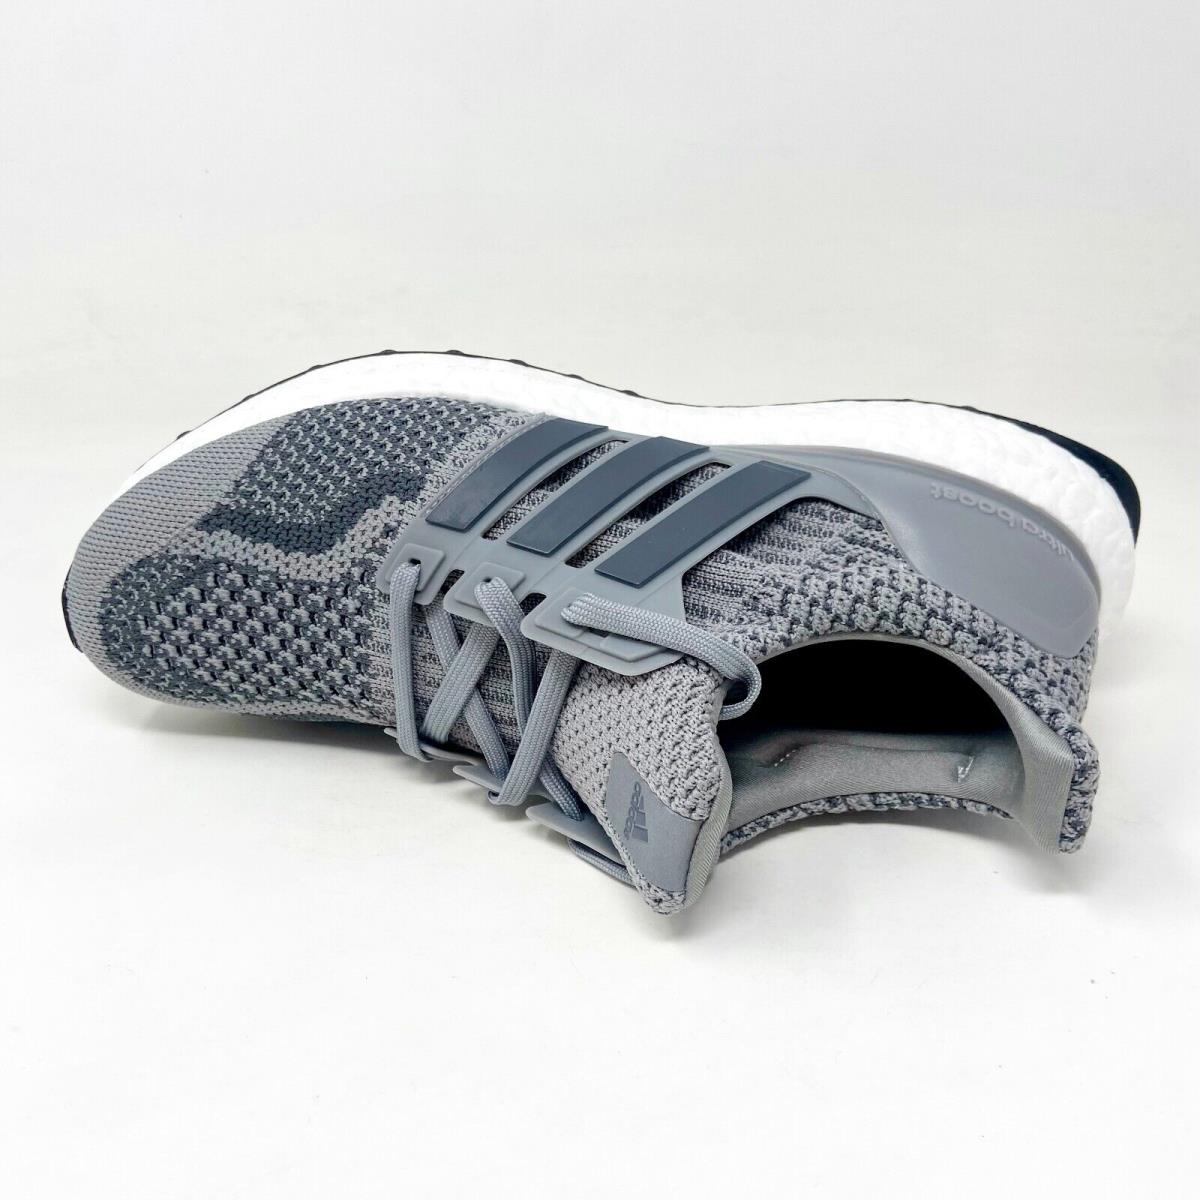 Adidas shoes UltraBoost DNA - Gray 2